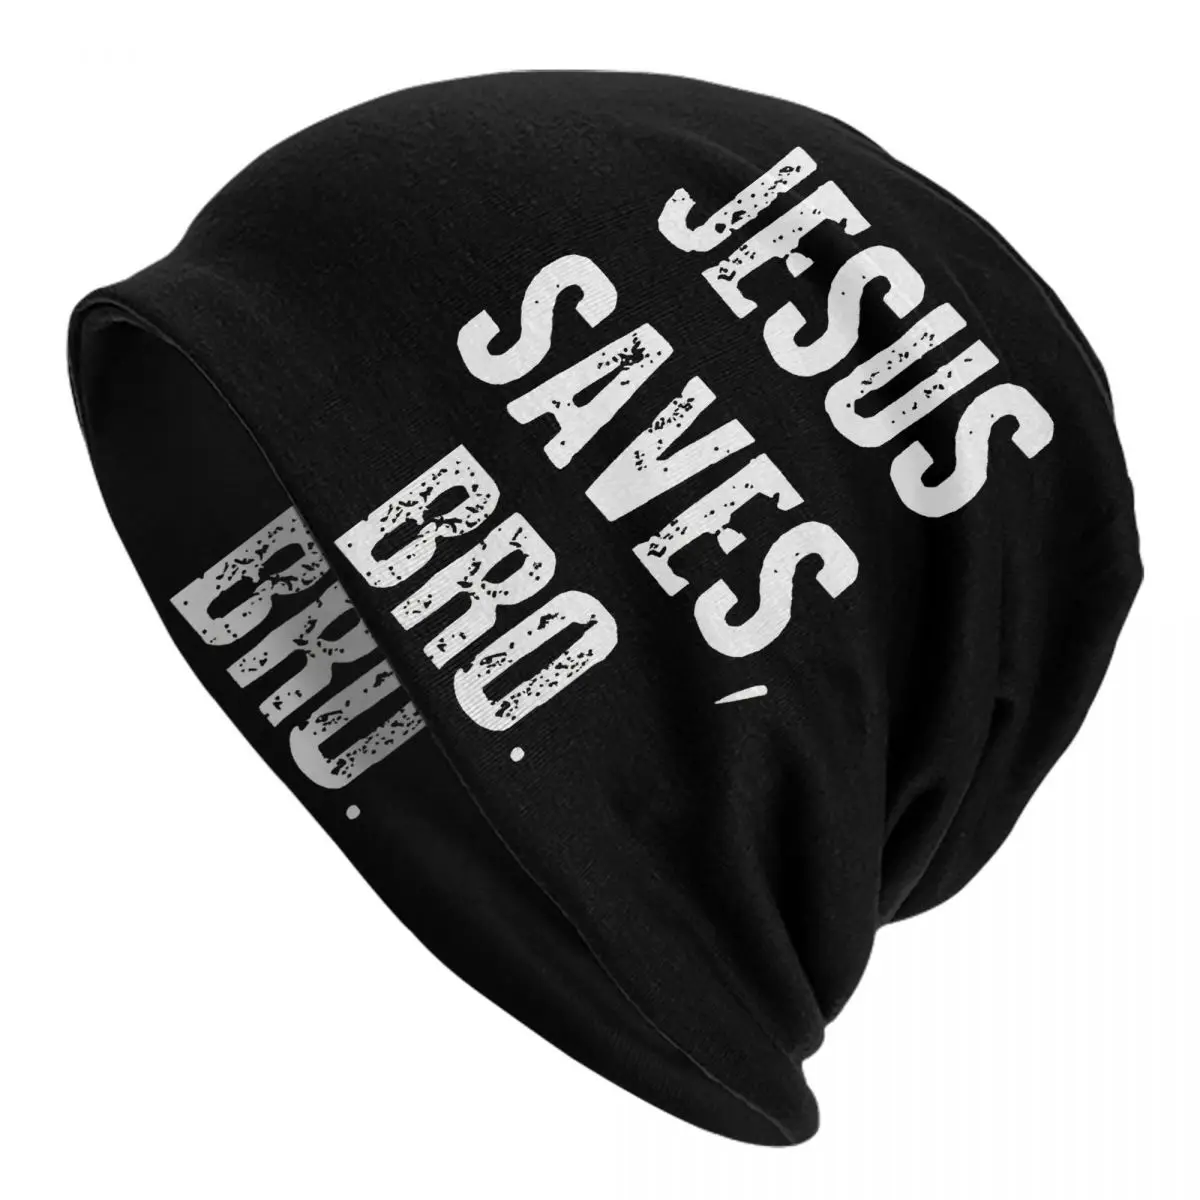 Jesus Saves Bro Adult Men's Women's Knit Hat Keep warm winter Funny knitted hat